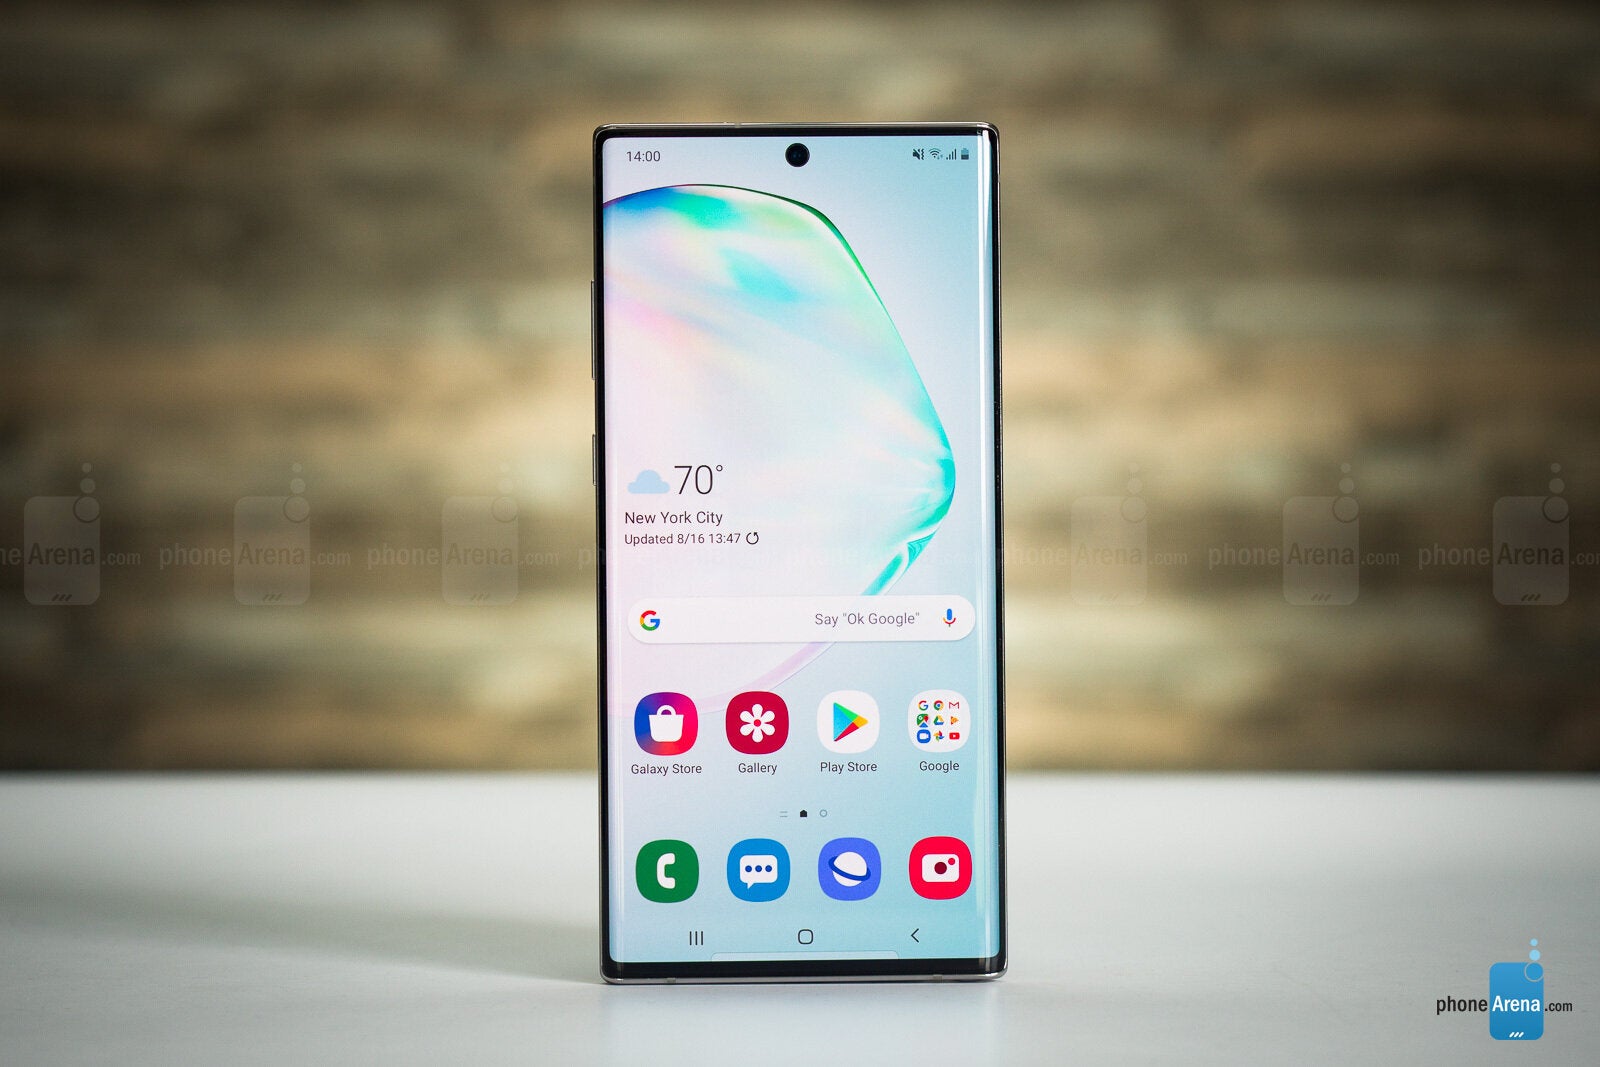 The basic model of last year's Galaxy Note 10 came equipped with 256GB of storage - Samsung will reportedly equip base Galaxy Note 20 handsets with 128GB of storage